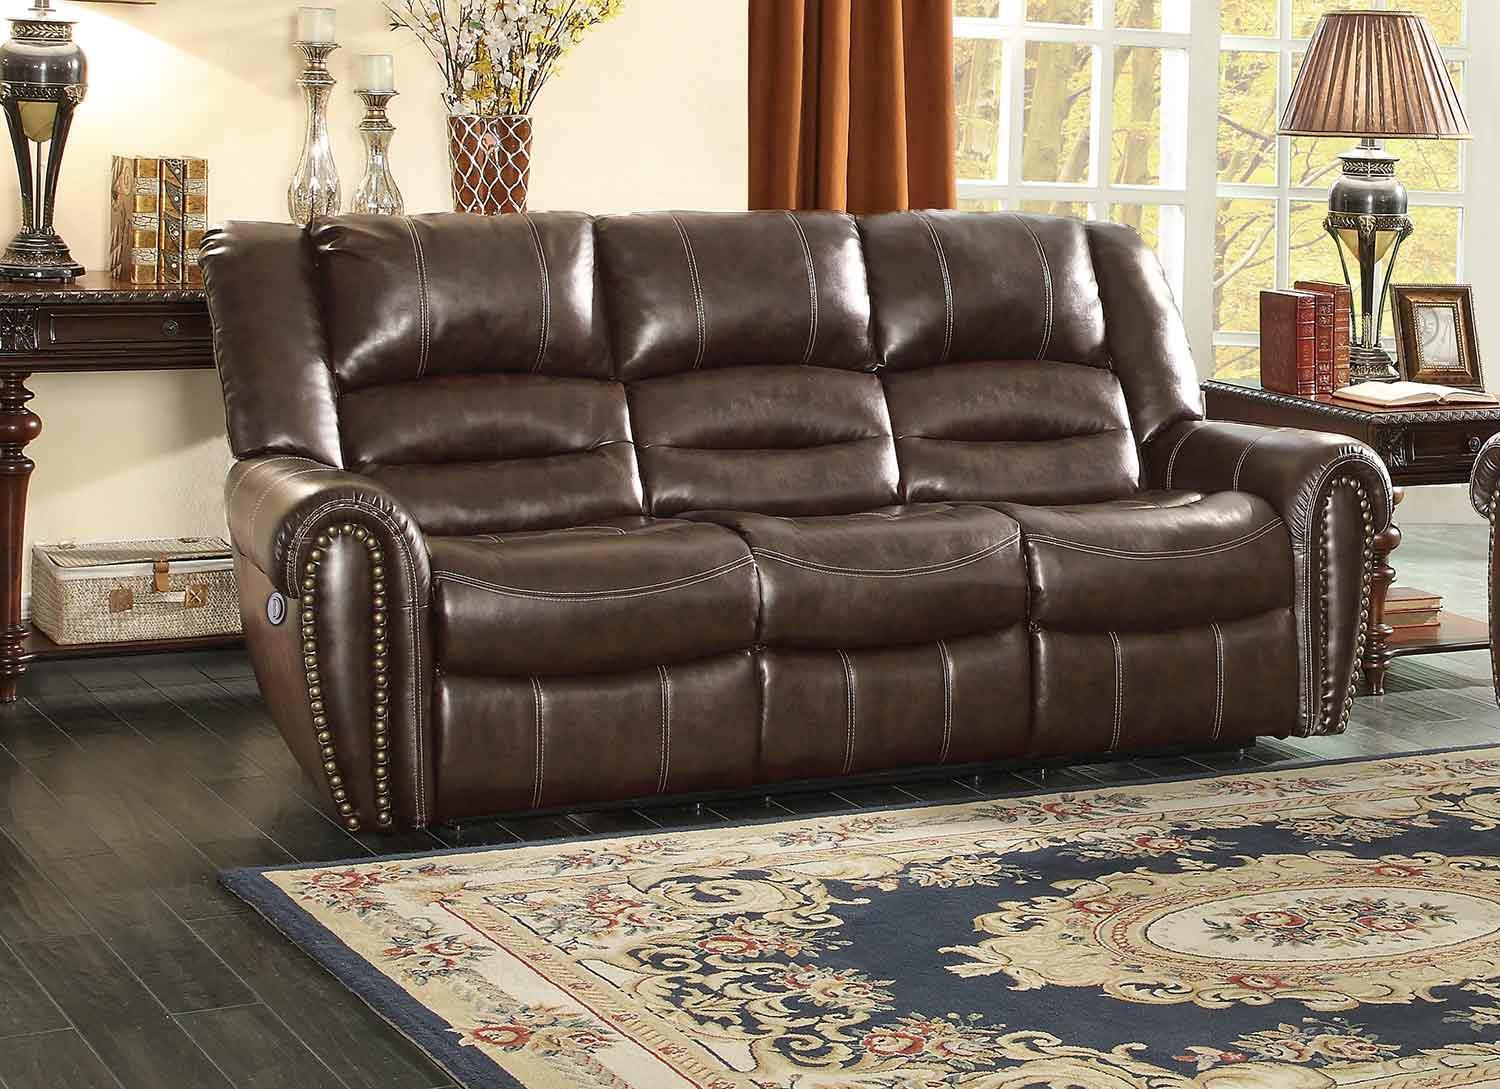 

    
Homelegance Center Hill Brown Bonded Leather Power Dual Reclining Sofa Set 3Pcs
